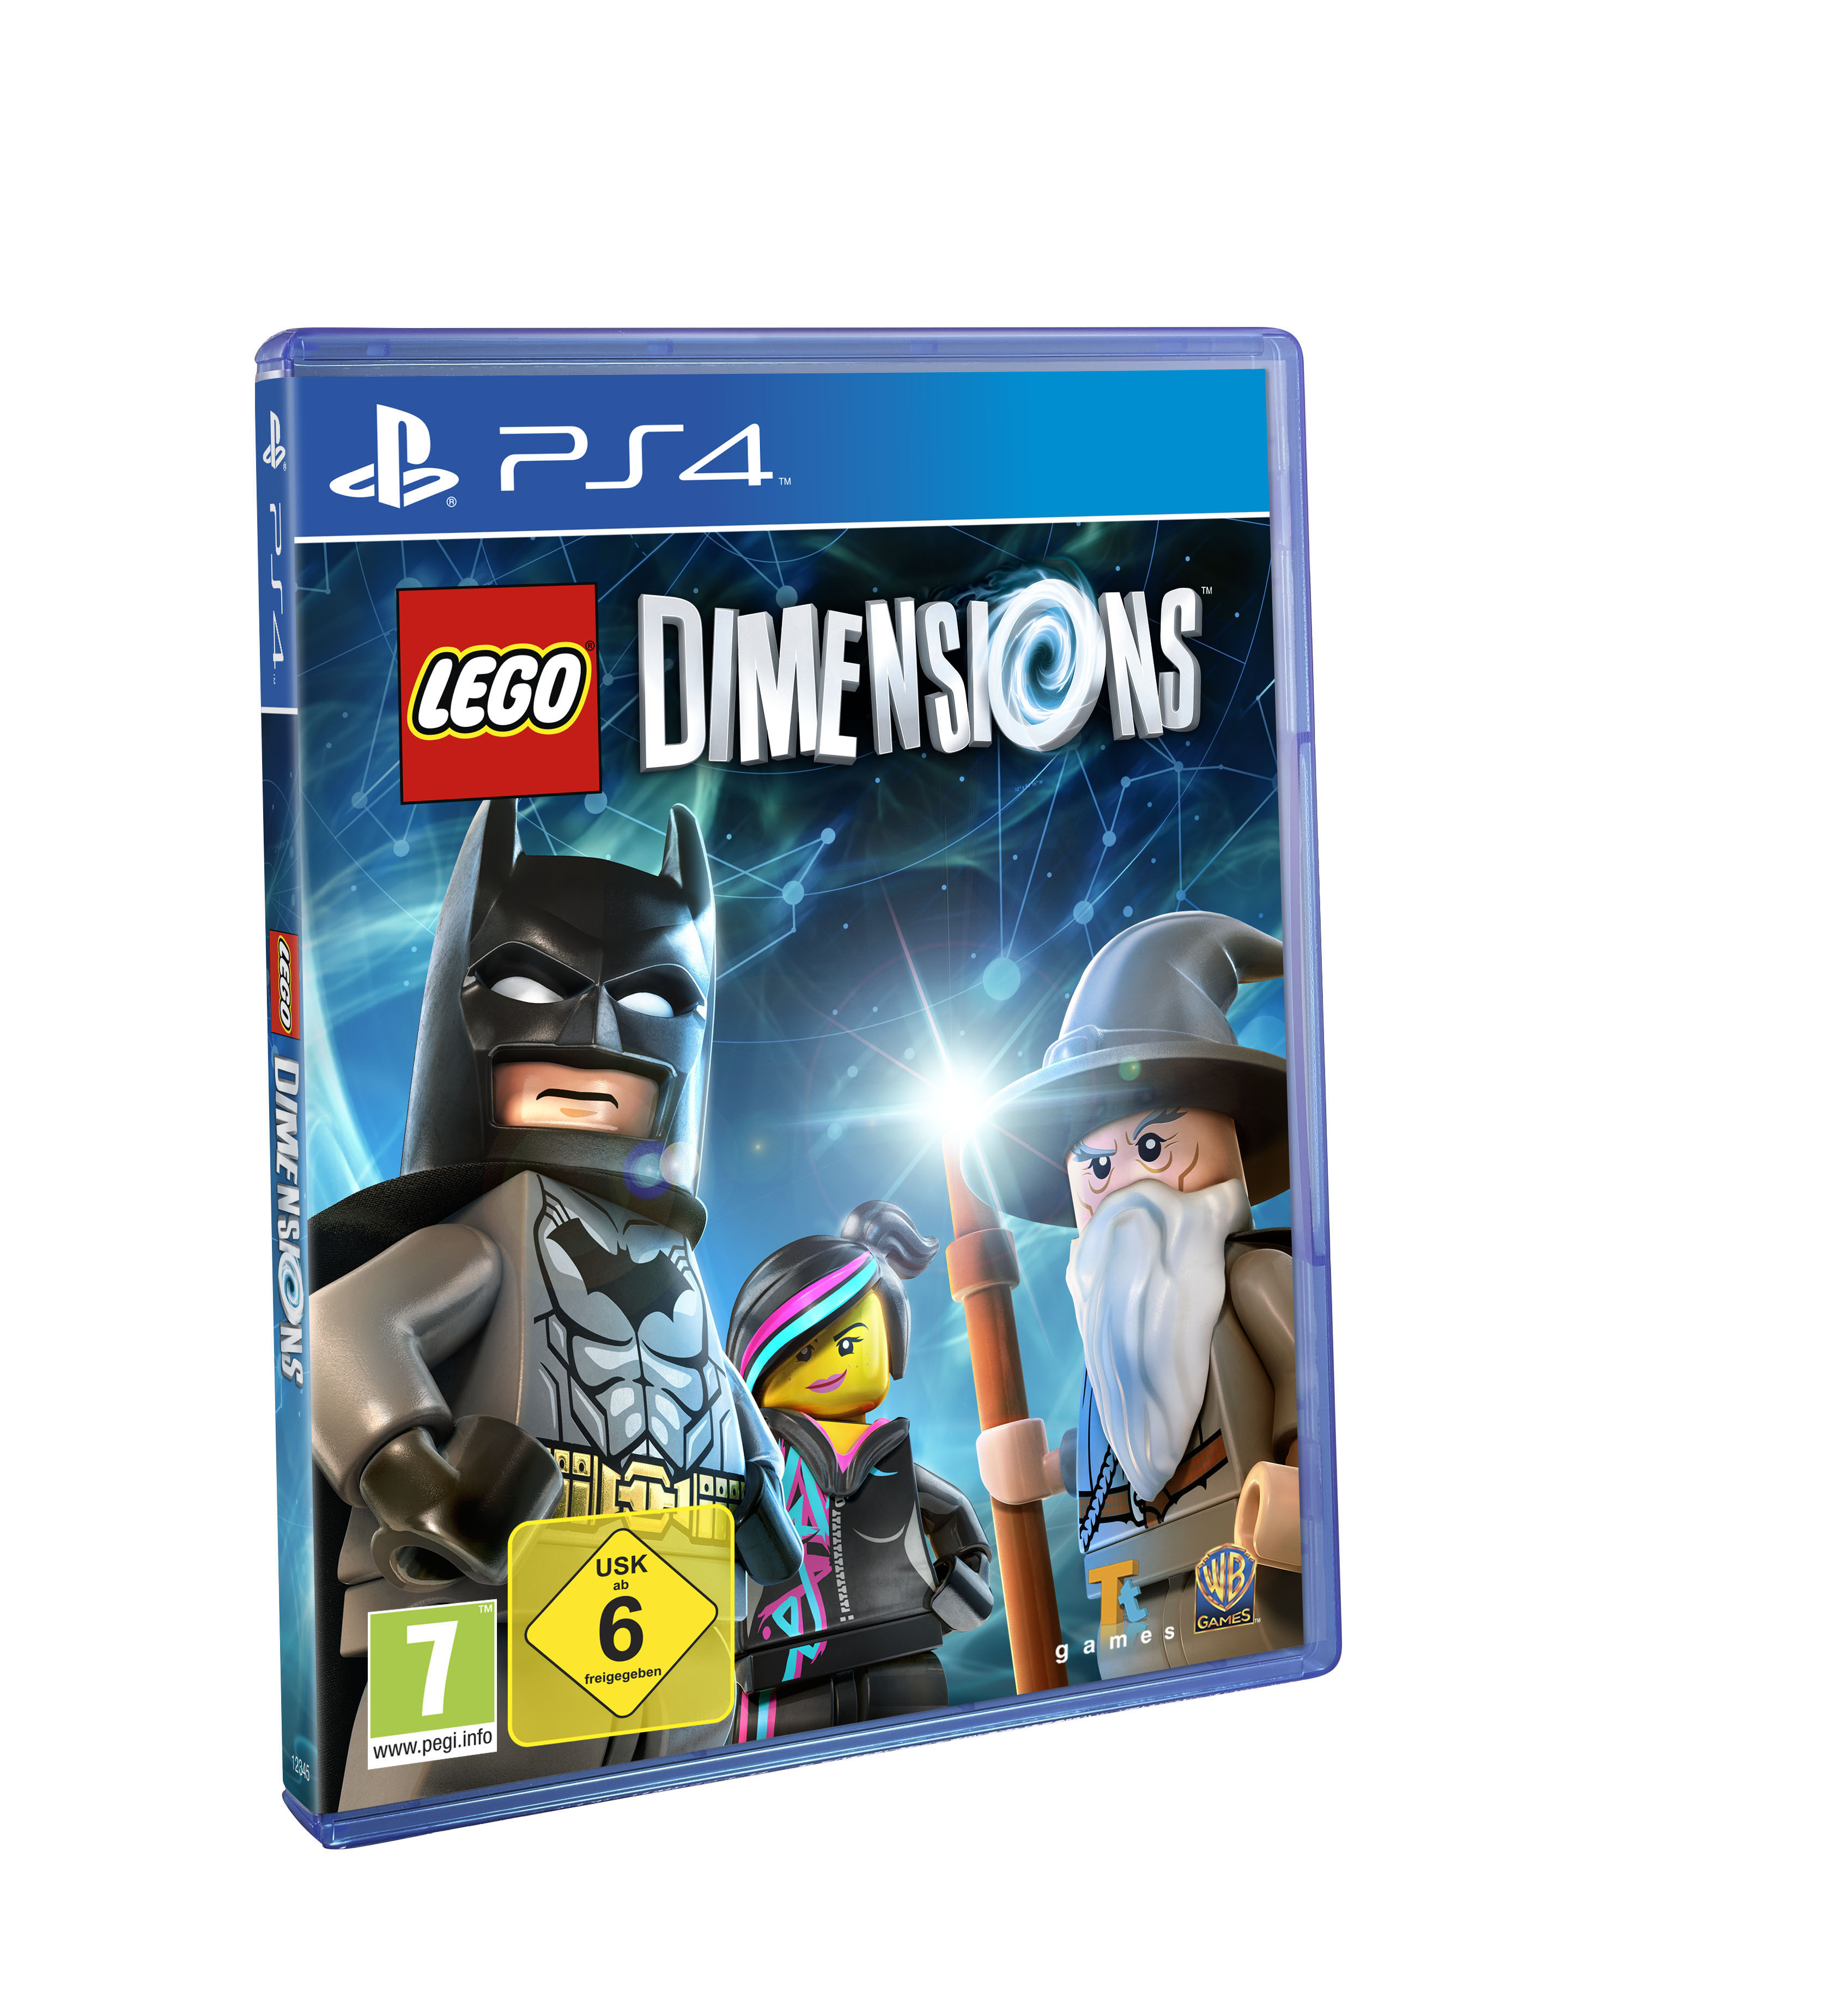 LEGO DIMENSIONS LEGO Dimensions Starter PS4 Pack Toy Smart